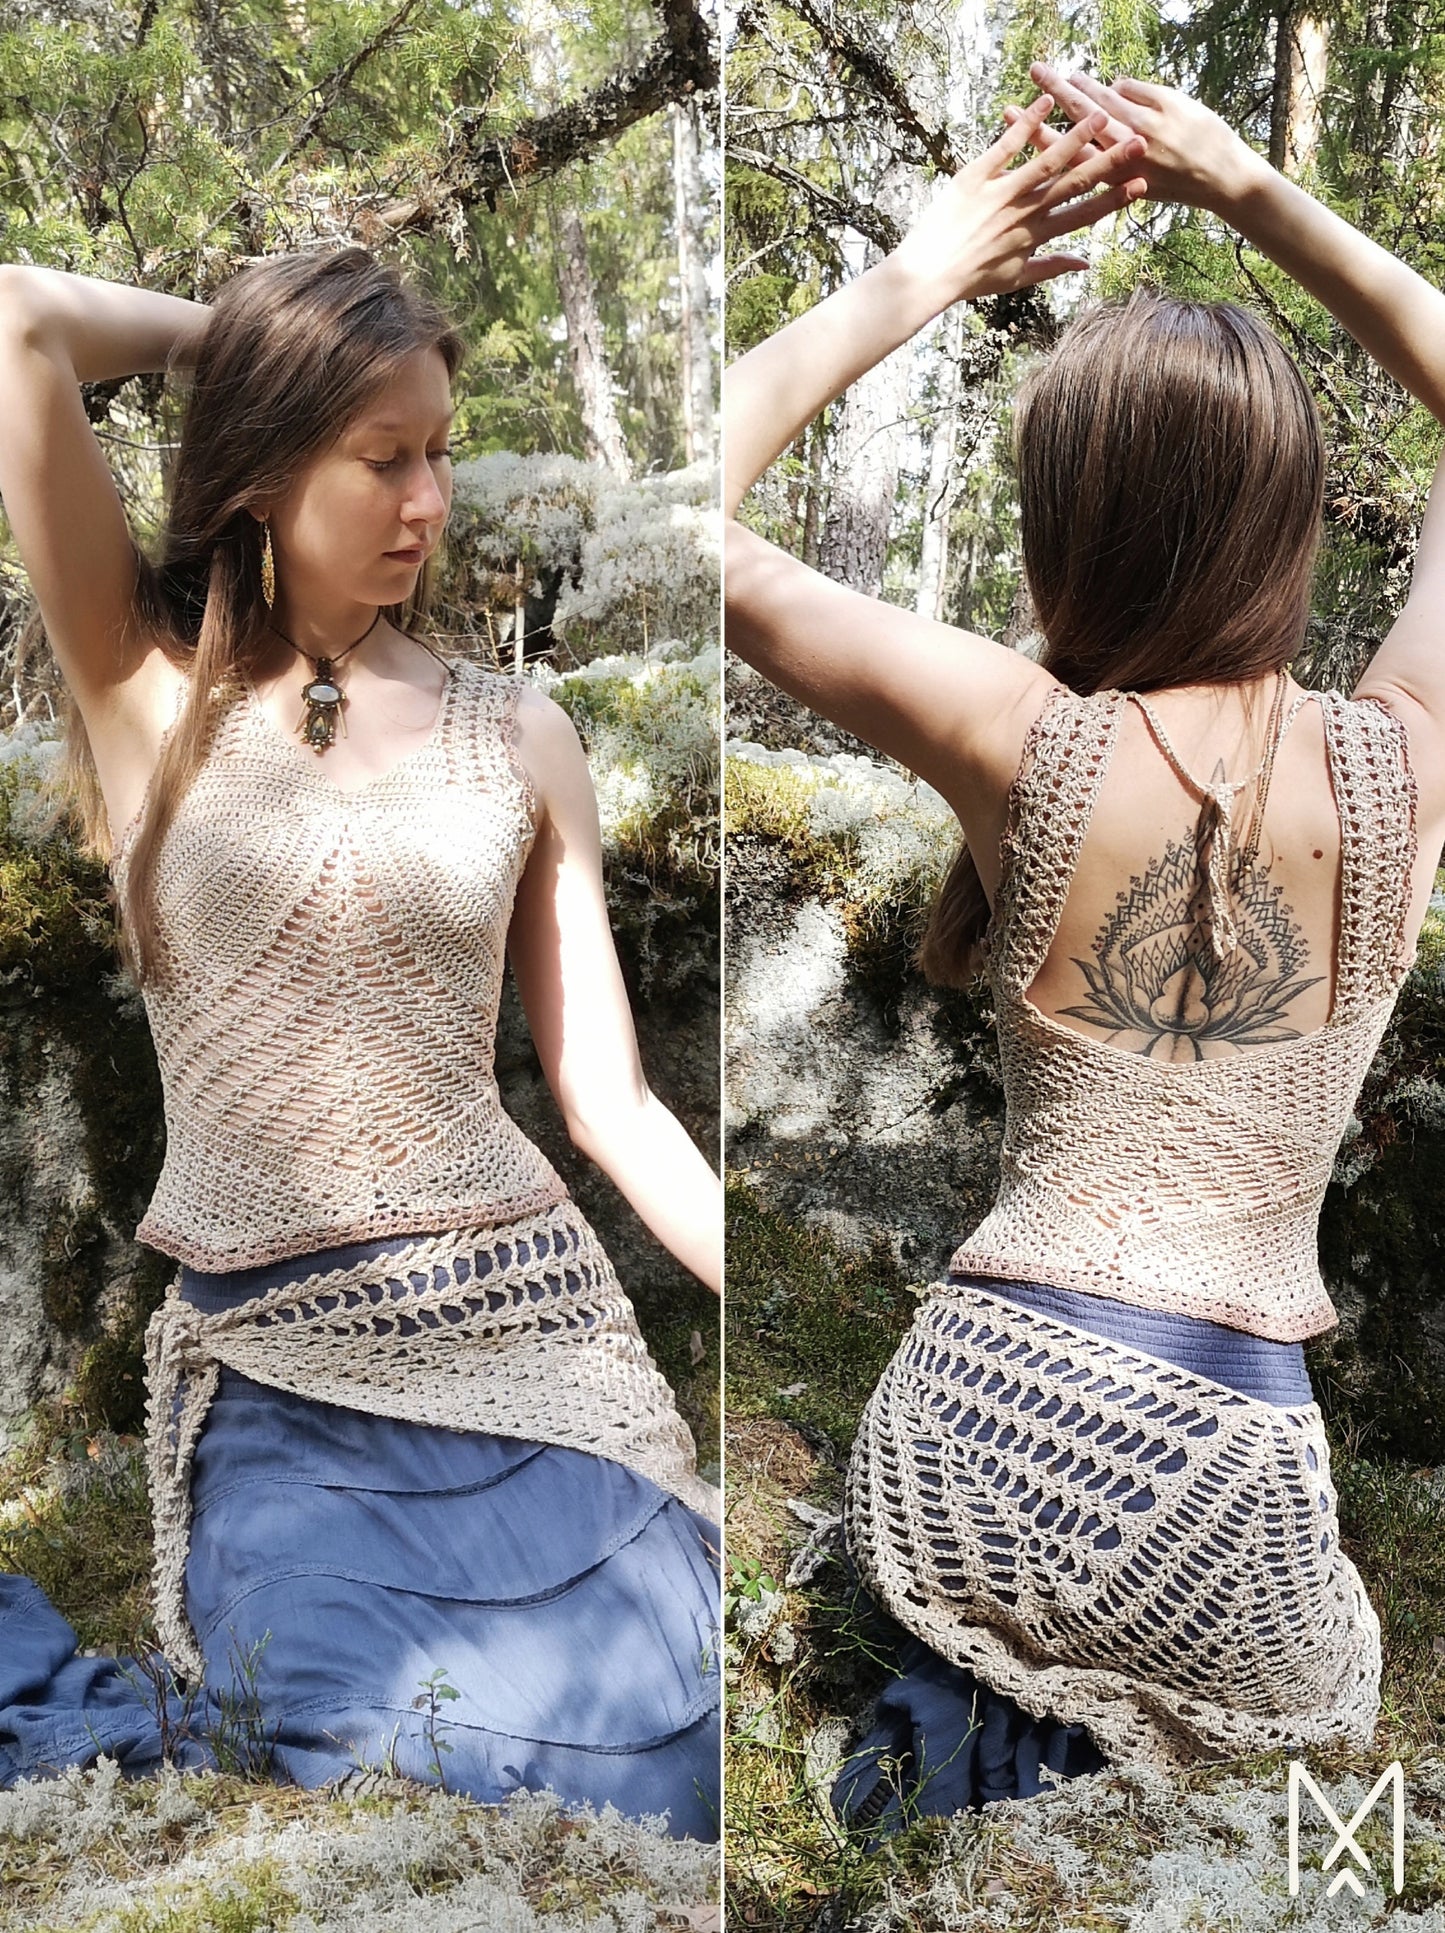 FAERIE | PDF crochet pattern | Lace top with V-shaped or straight hem